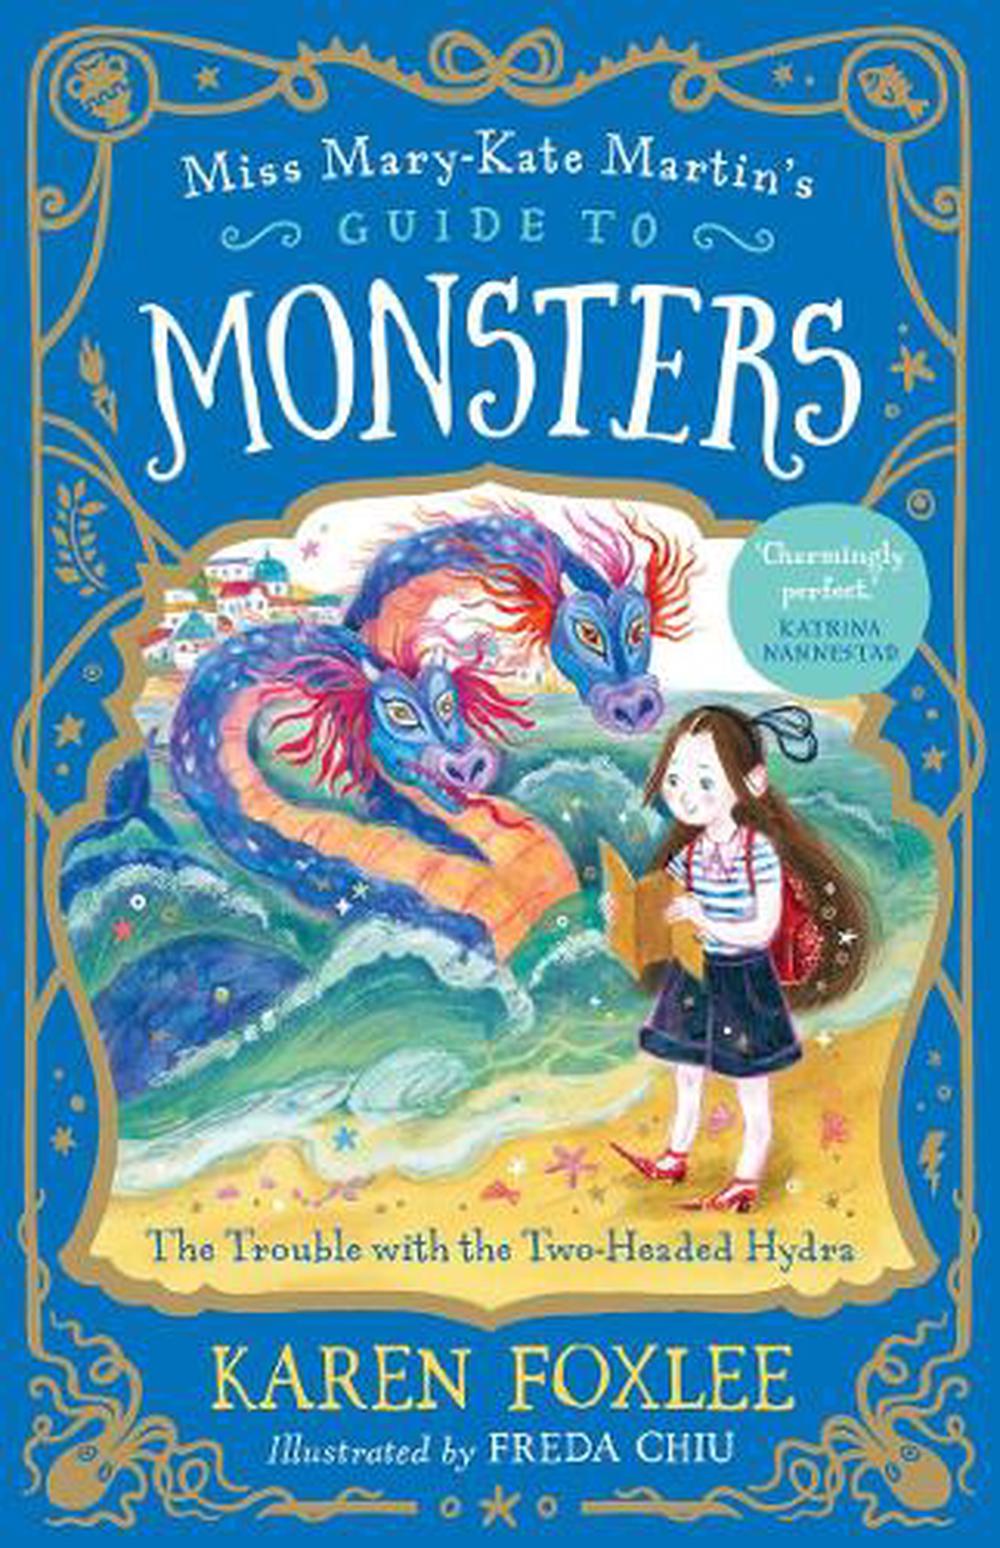 The Trouble With The Two-headed Hydra: Miss Mary-kate Martin's Guide To Monsters 2